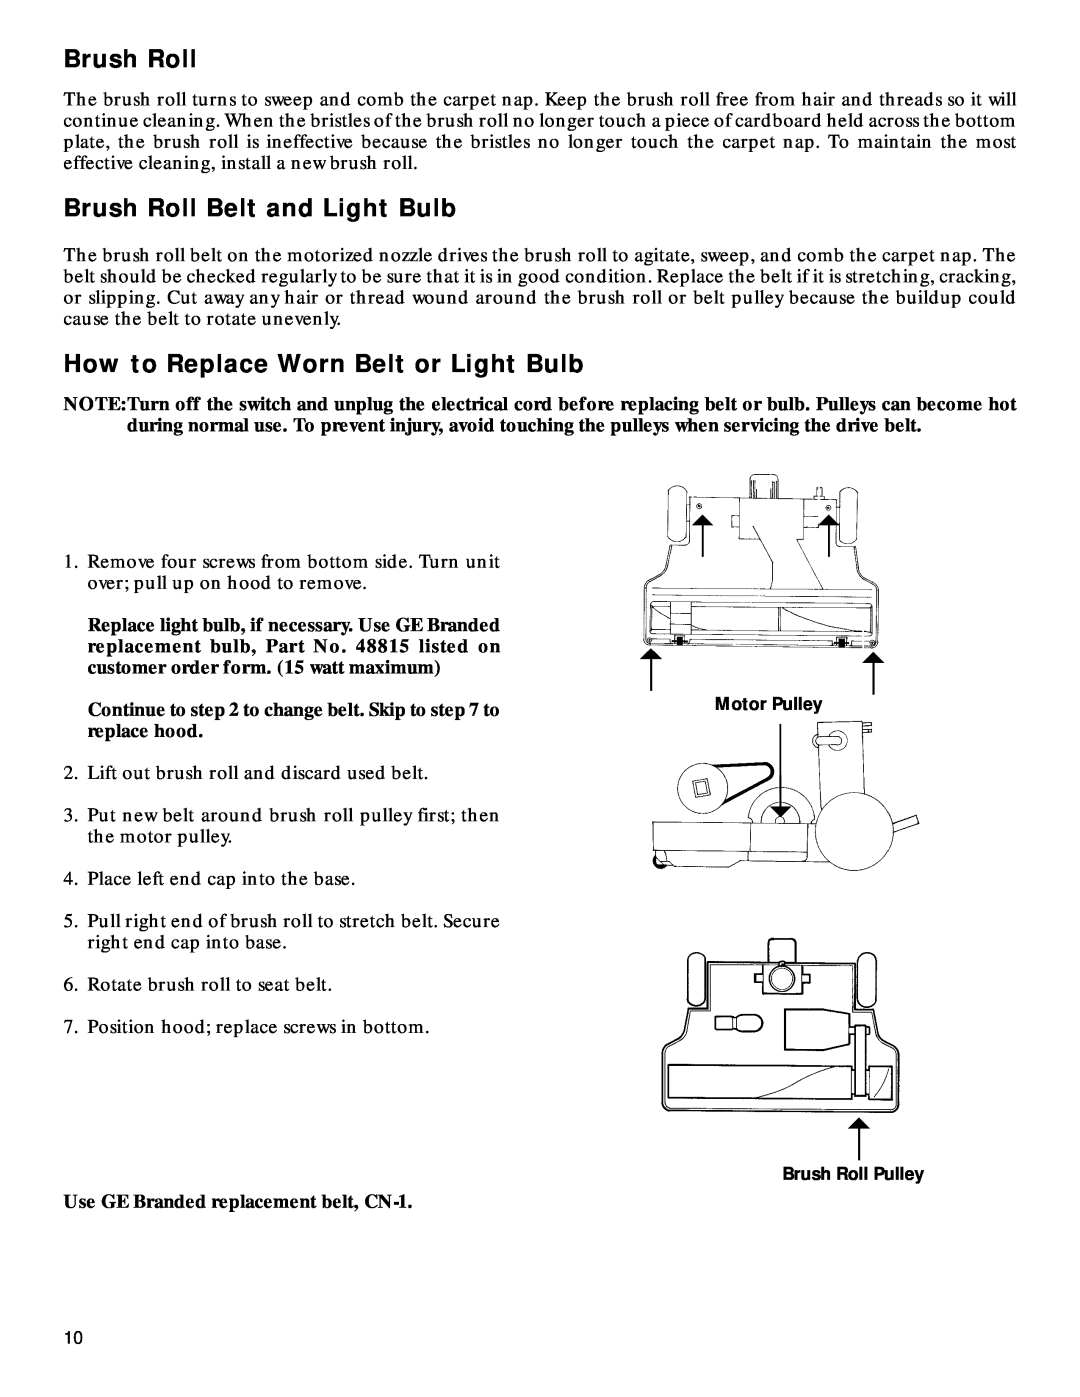 GE 106766, 71937 warranty Brush Roll Belt and Light Bulb, How to Replace Worn Belt or Light Bulb 